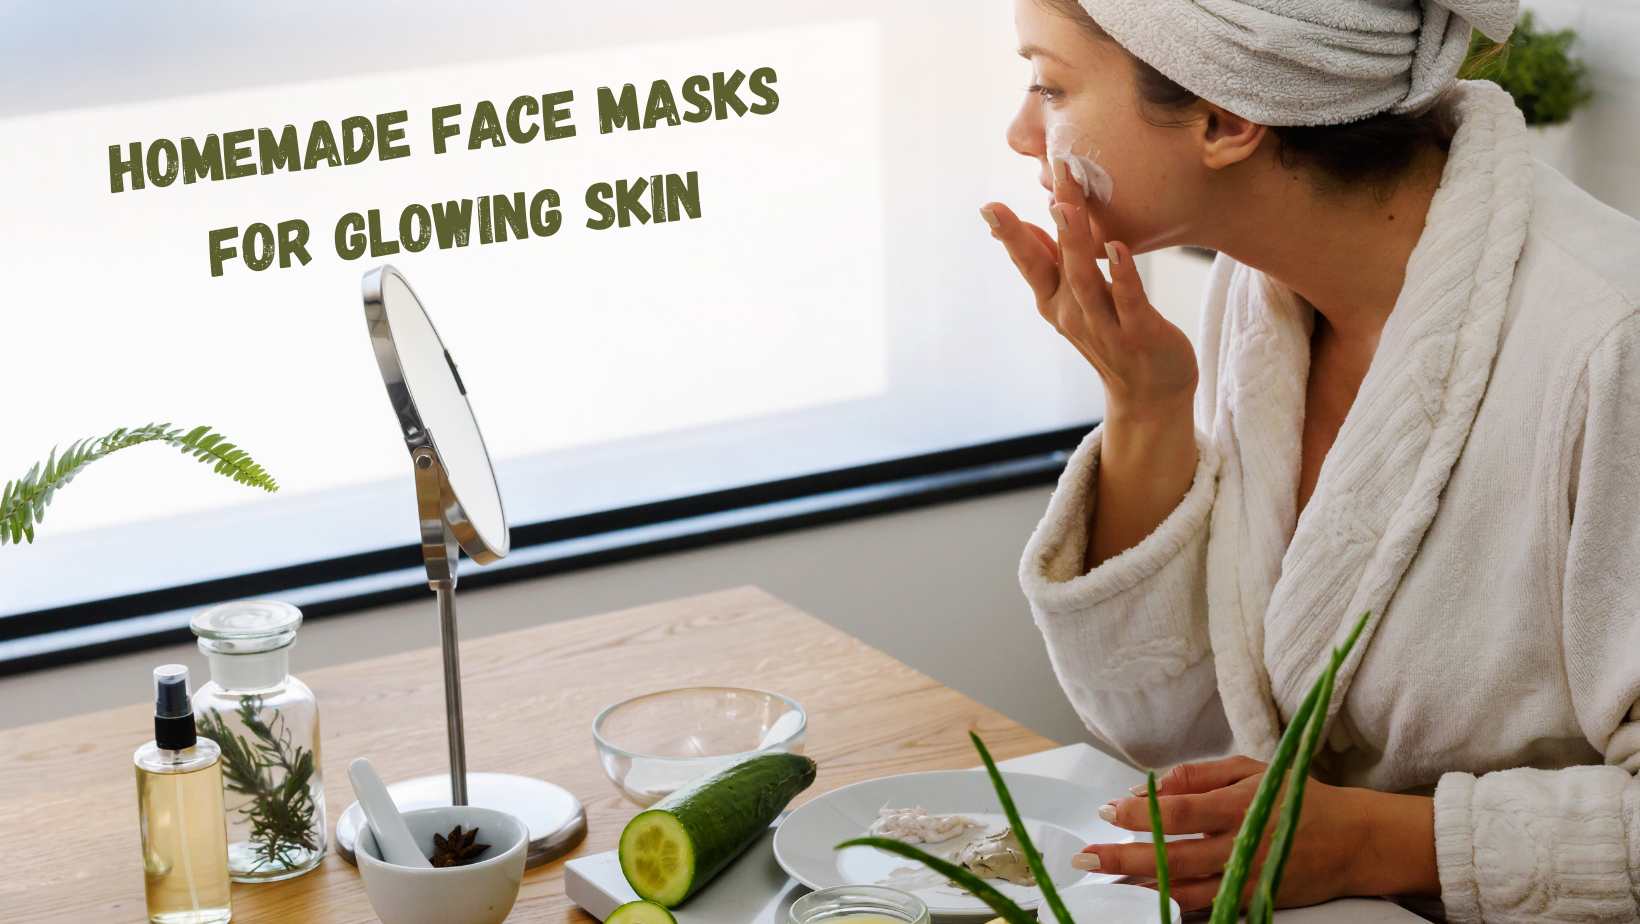 Homemade Face Masks For Glowing Skin